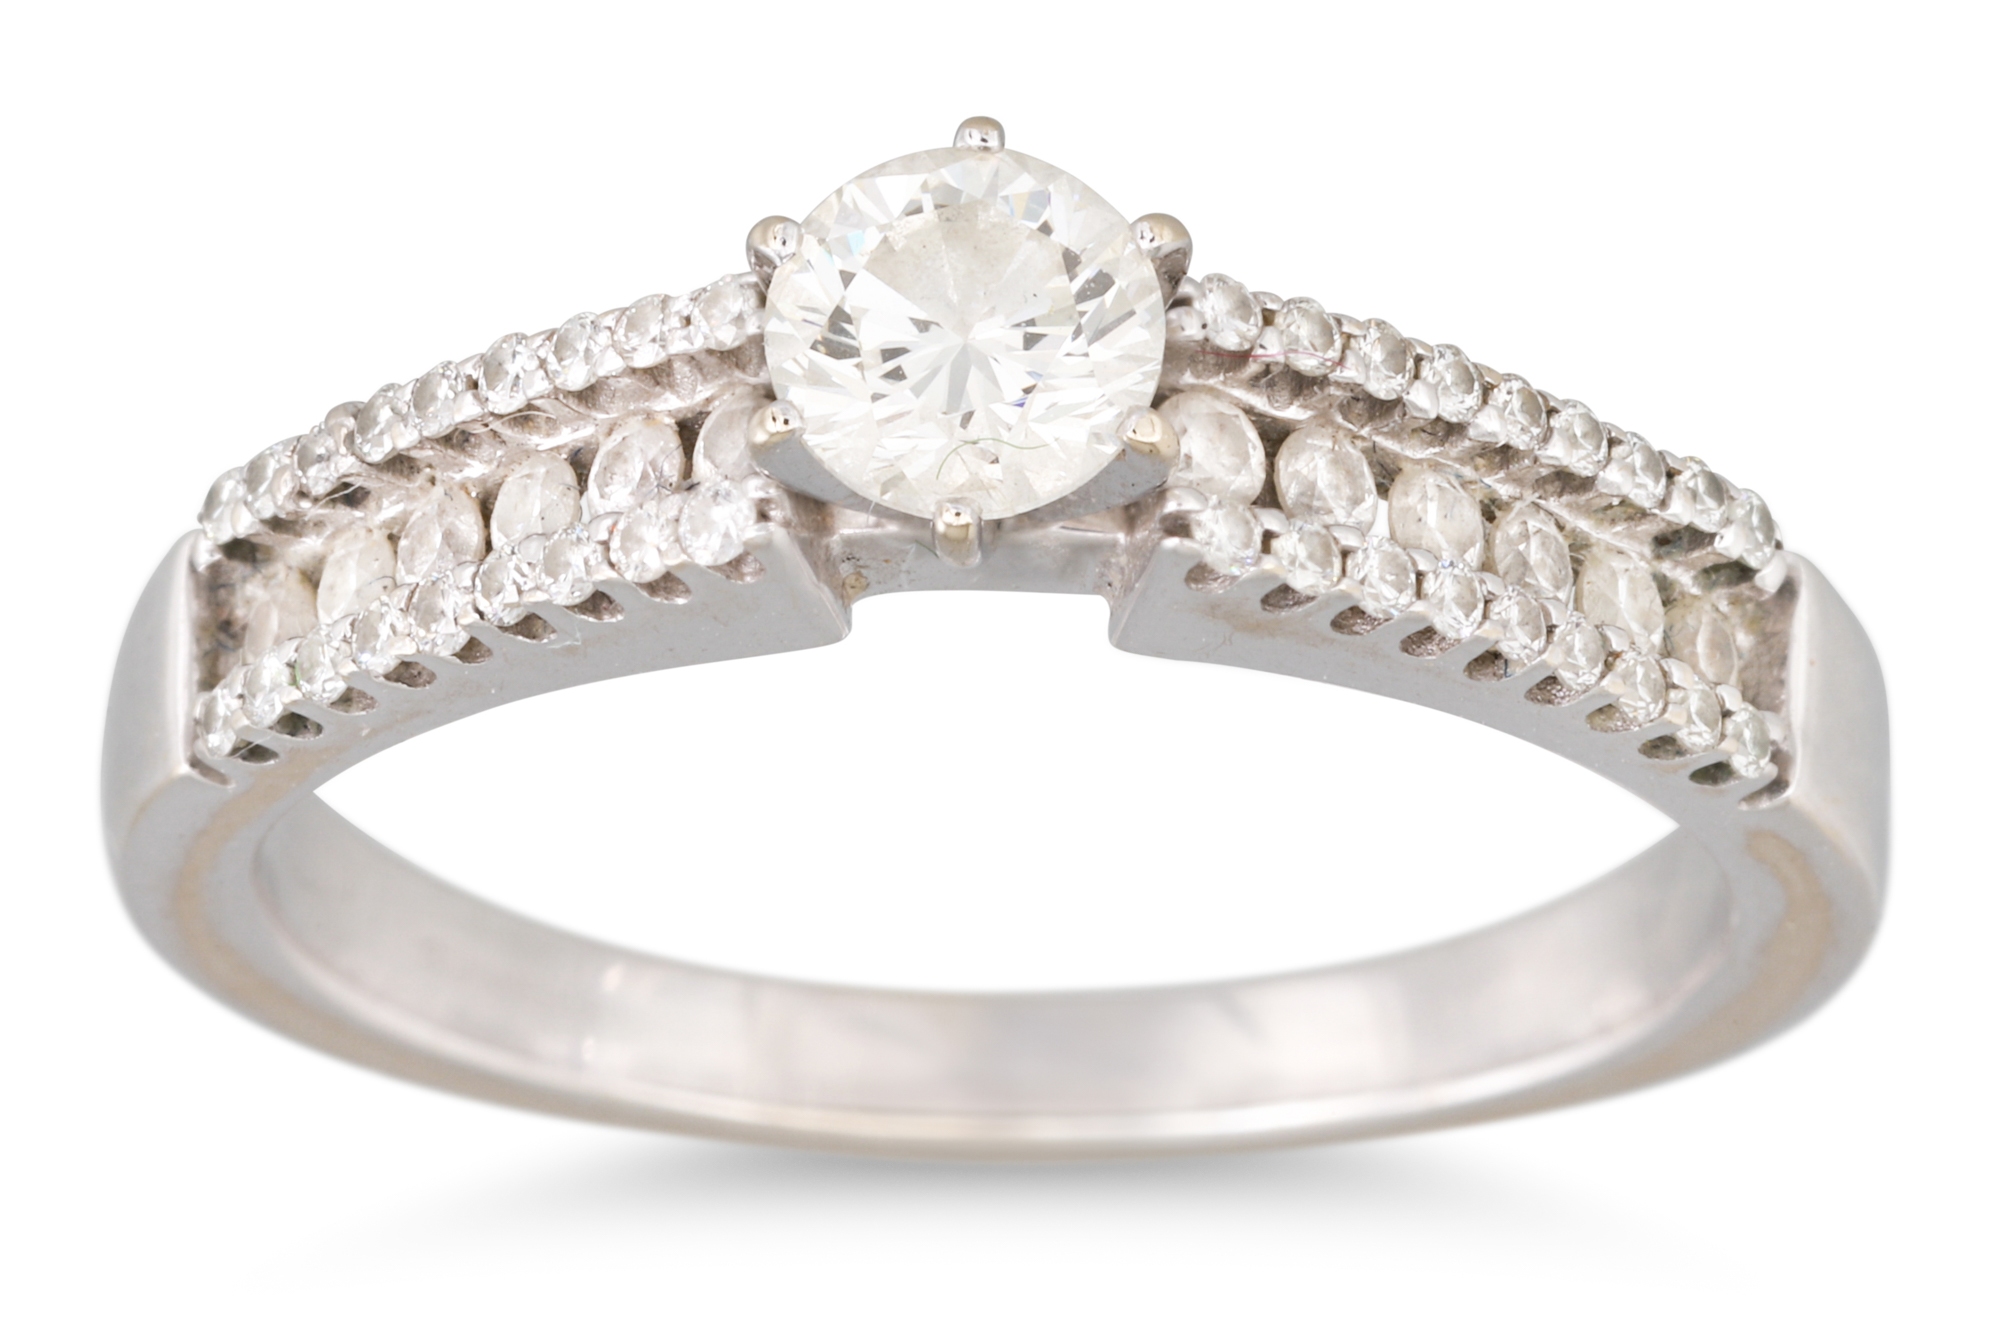 A DIAMOND SOLITAIRE RING, the brilliant cut diamond to diamond shoulders, mounted in 18ct white